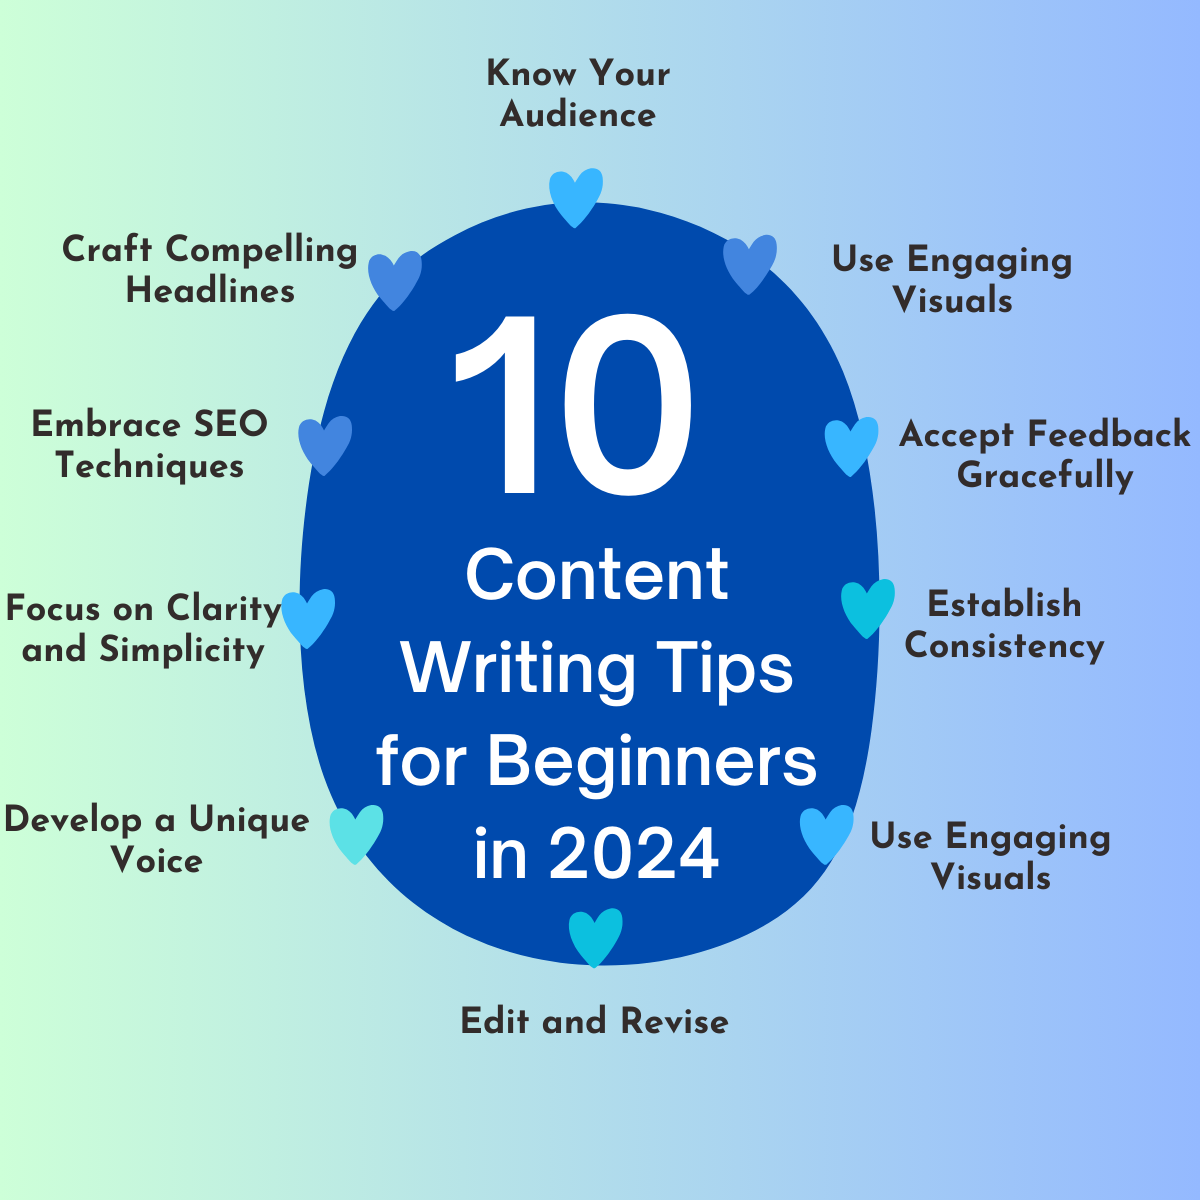 content writing tips for beginners in 2024 with 10 key points.